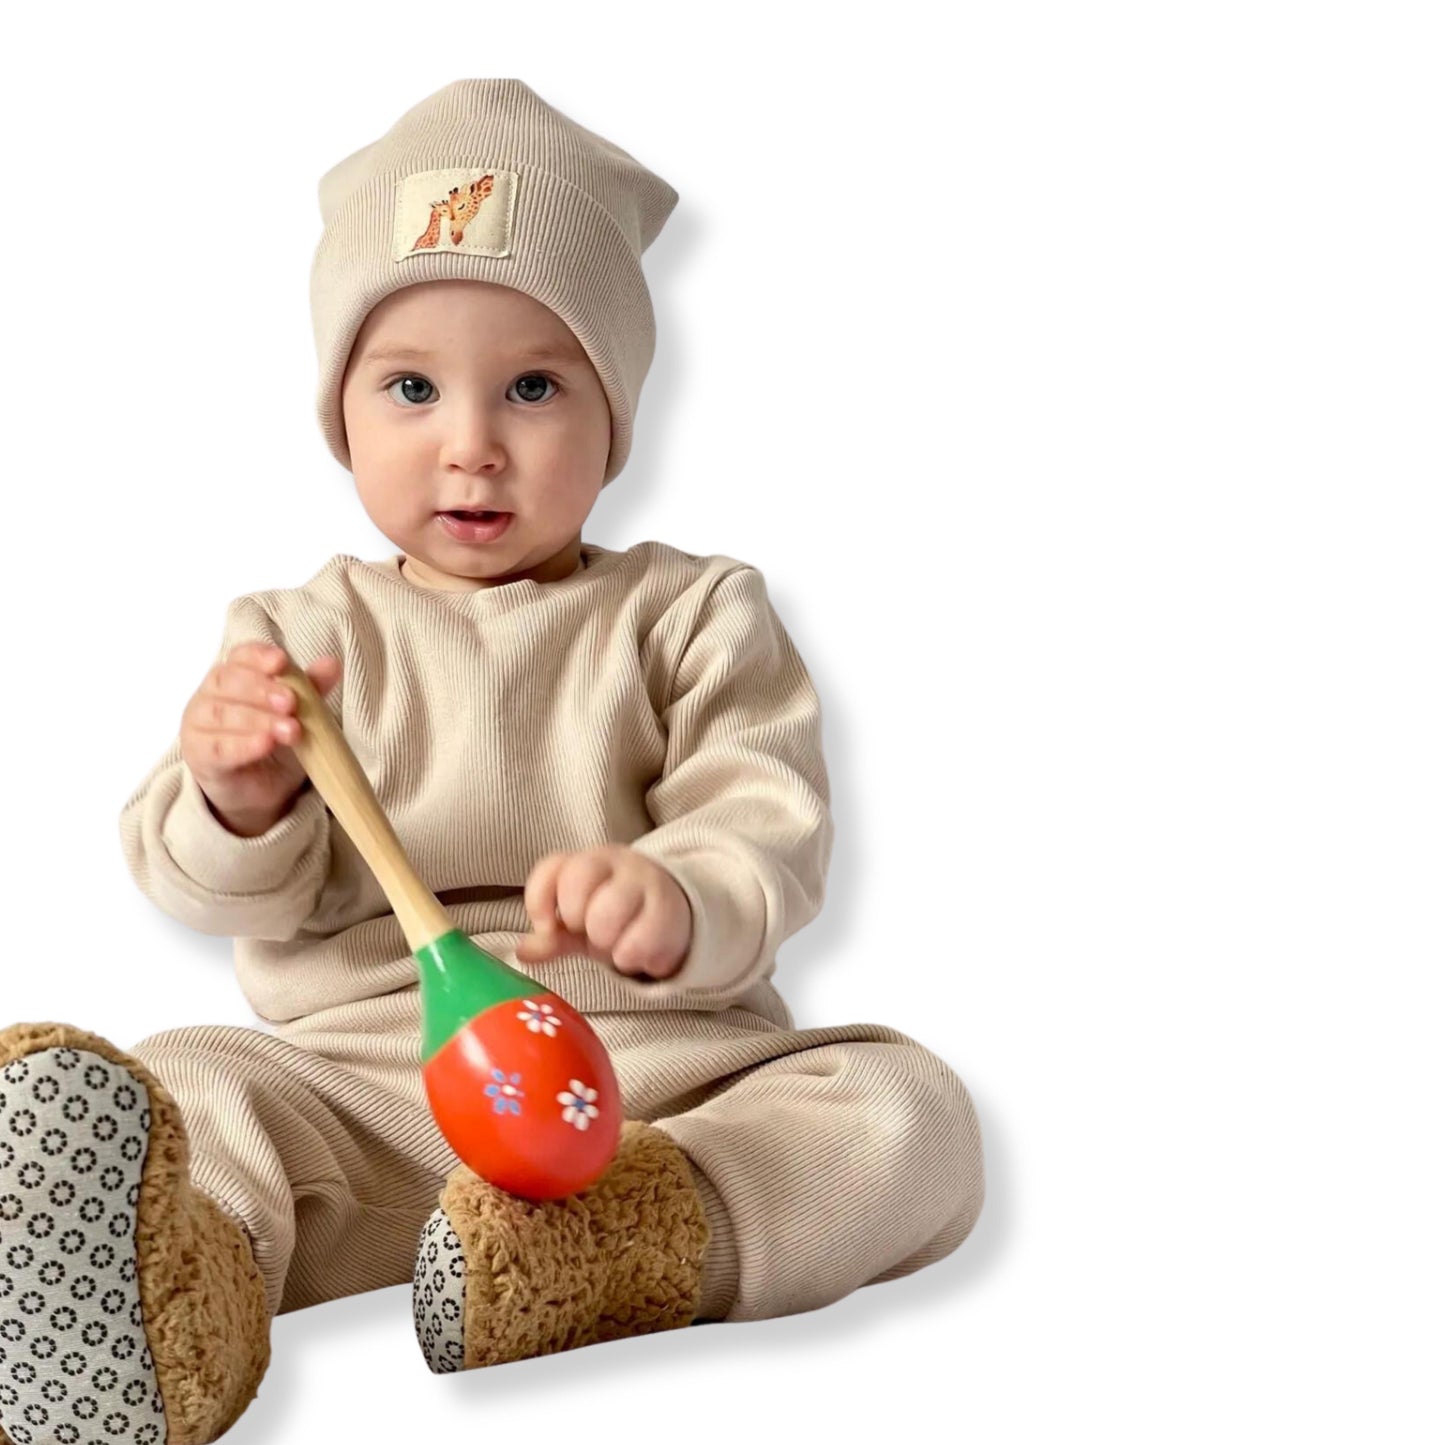 KidsKiddy™ - Cotton 3-piece Top, Bottom, and Beanie Hat Set for Babies and Toddlers